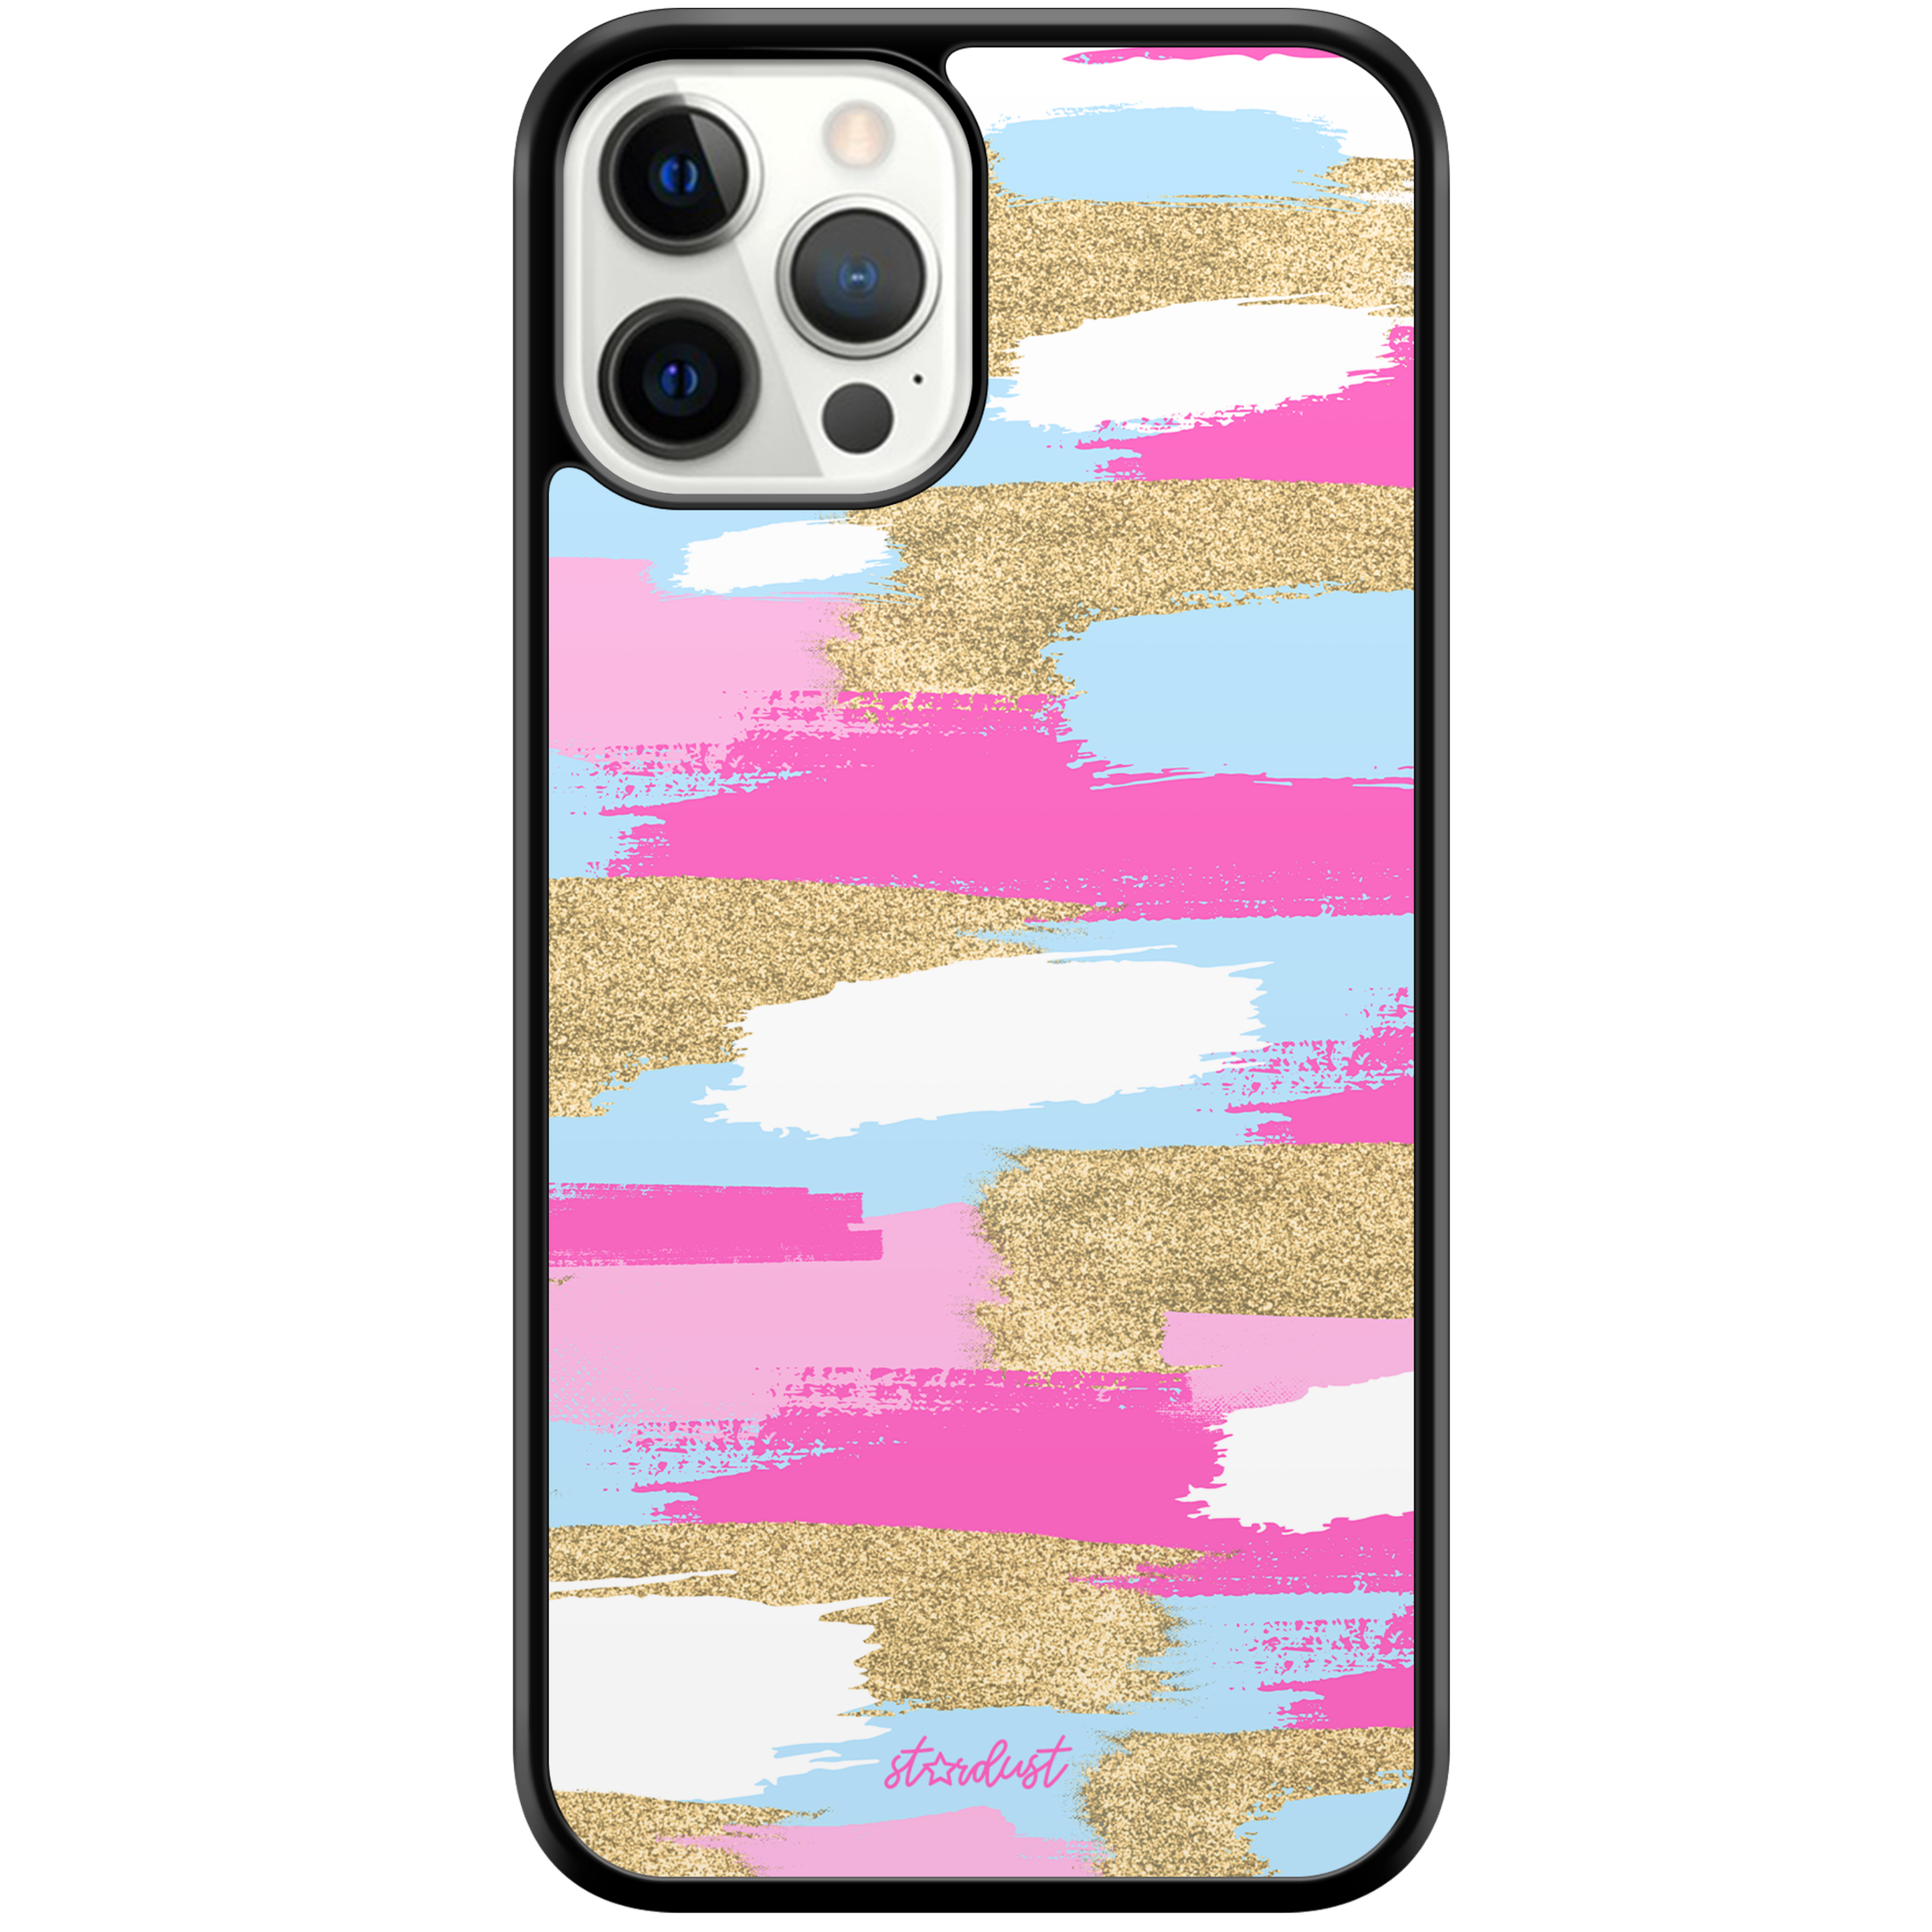 Painted iPhone Case